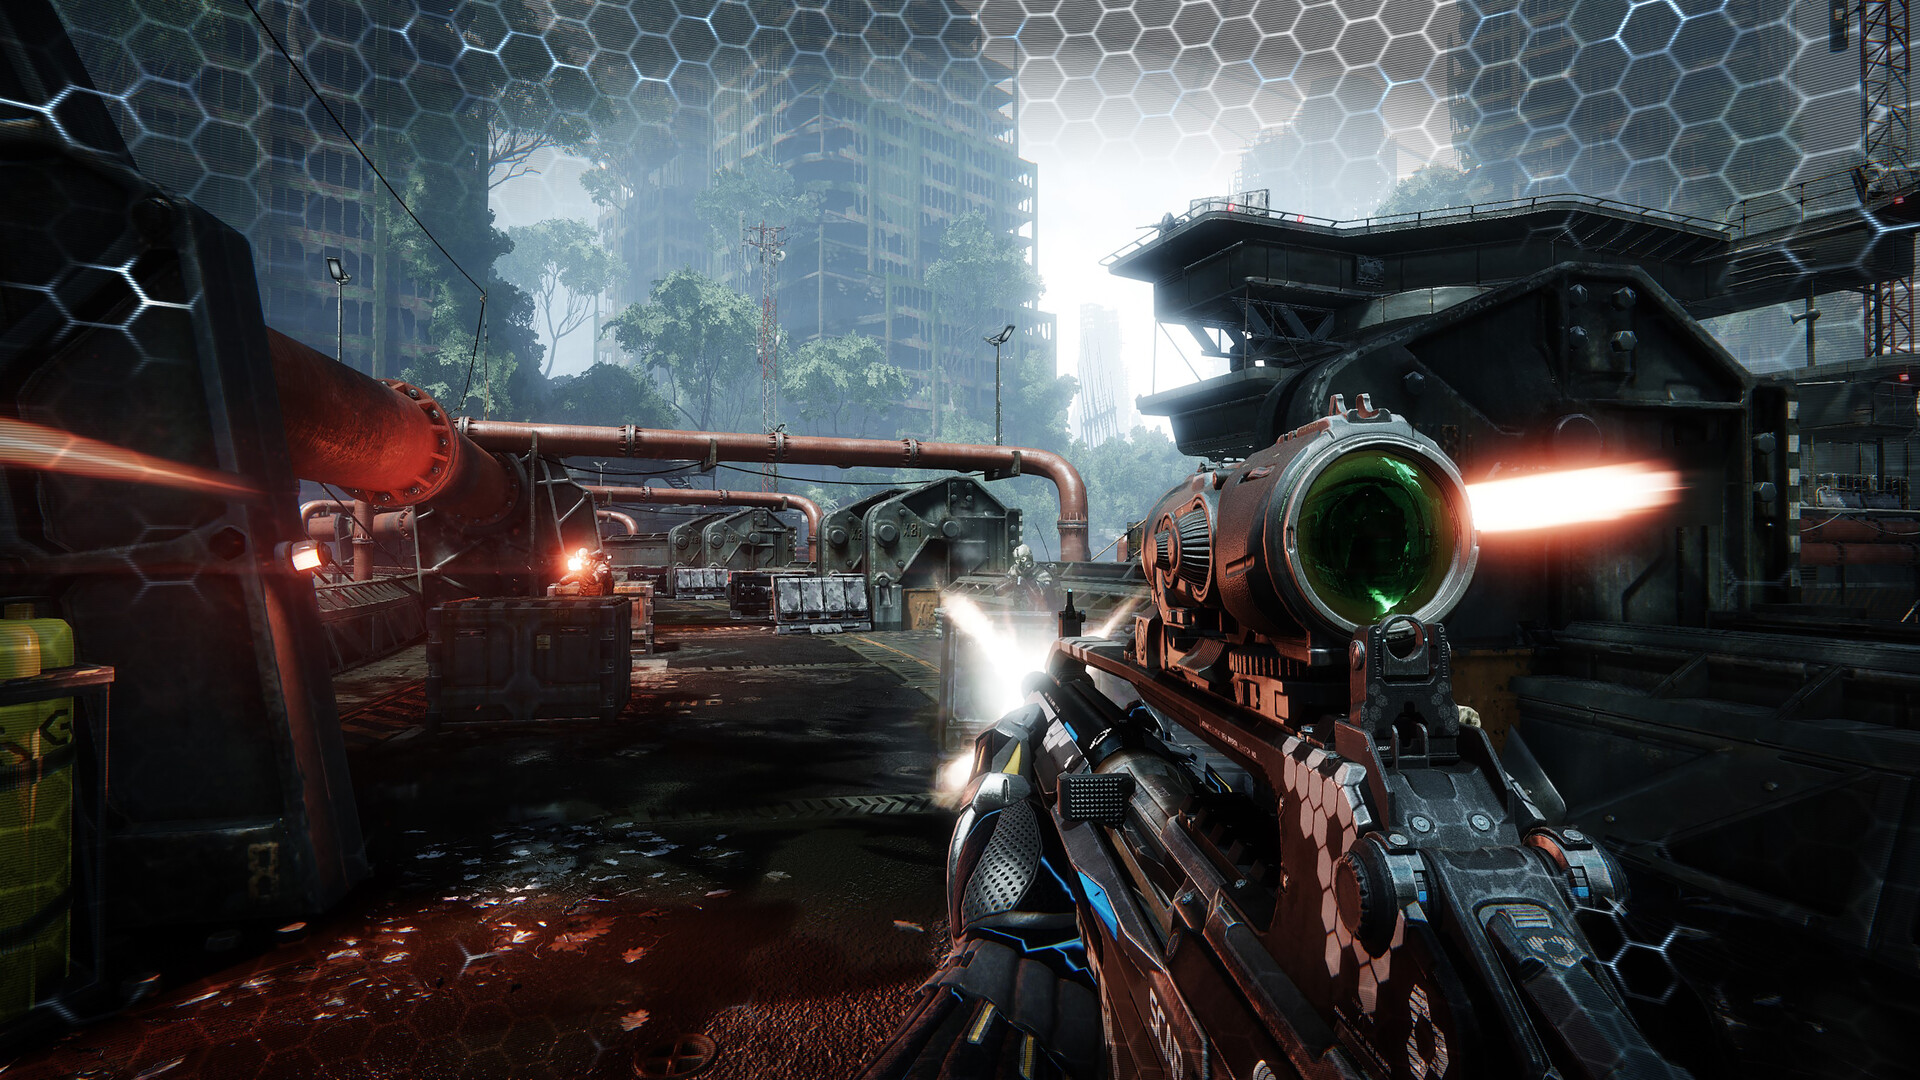 Crysis 3 Remastered Steam Account